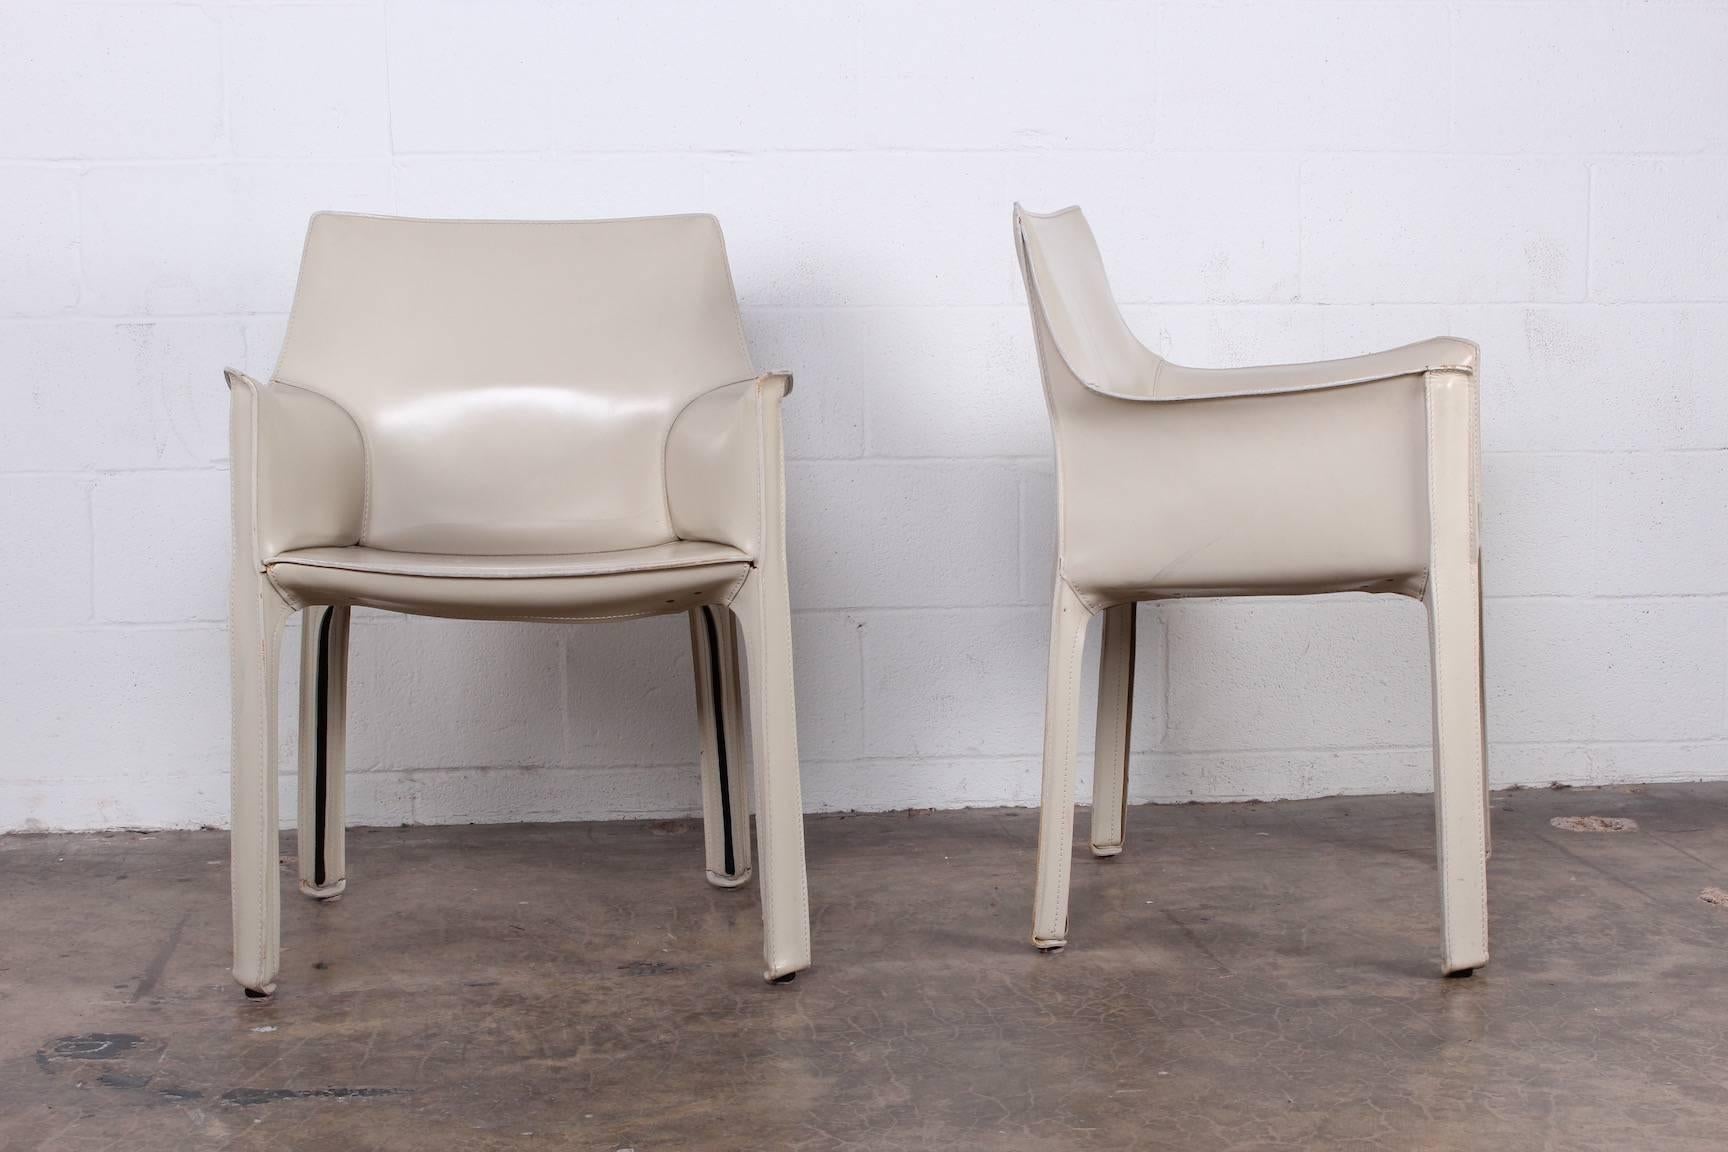 A set of ten cab armchairs in bone colored leather designed by Mario Bellini for Cassina.